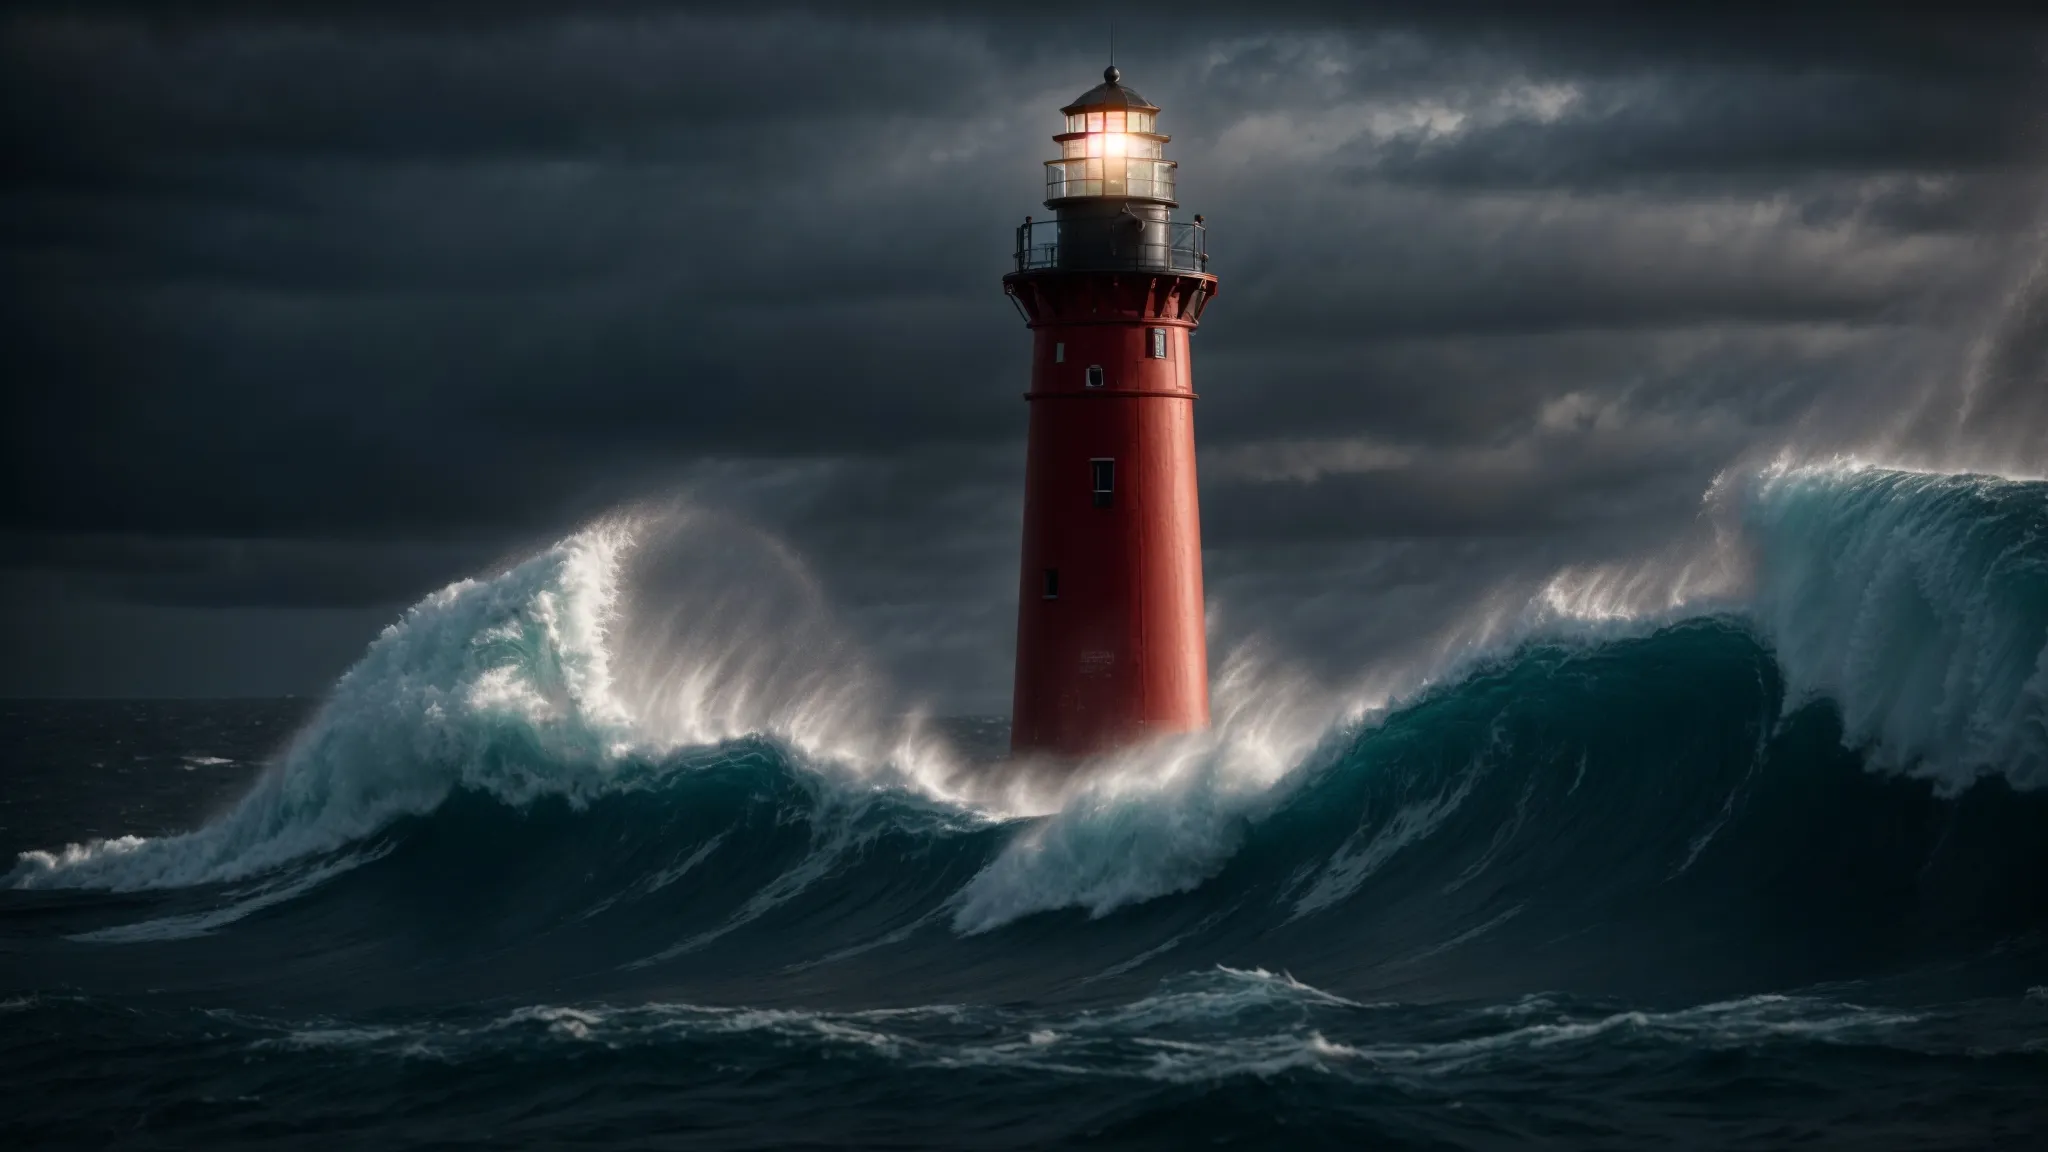 a lighthouse stands tall, casting its beacon over tumultuous seas under a starry sky, guiding ships safely to shore.